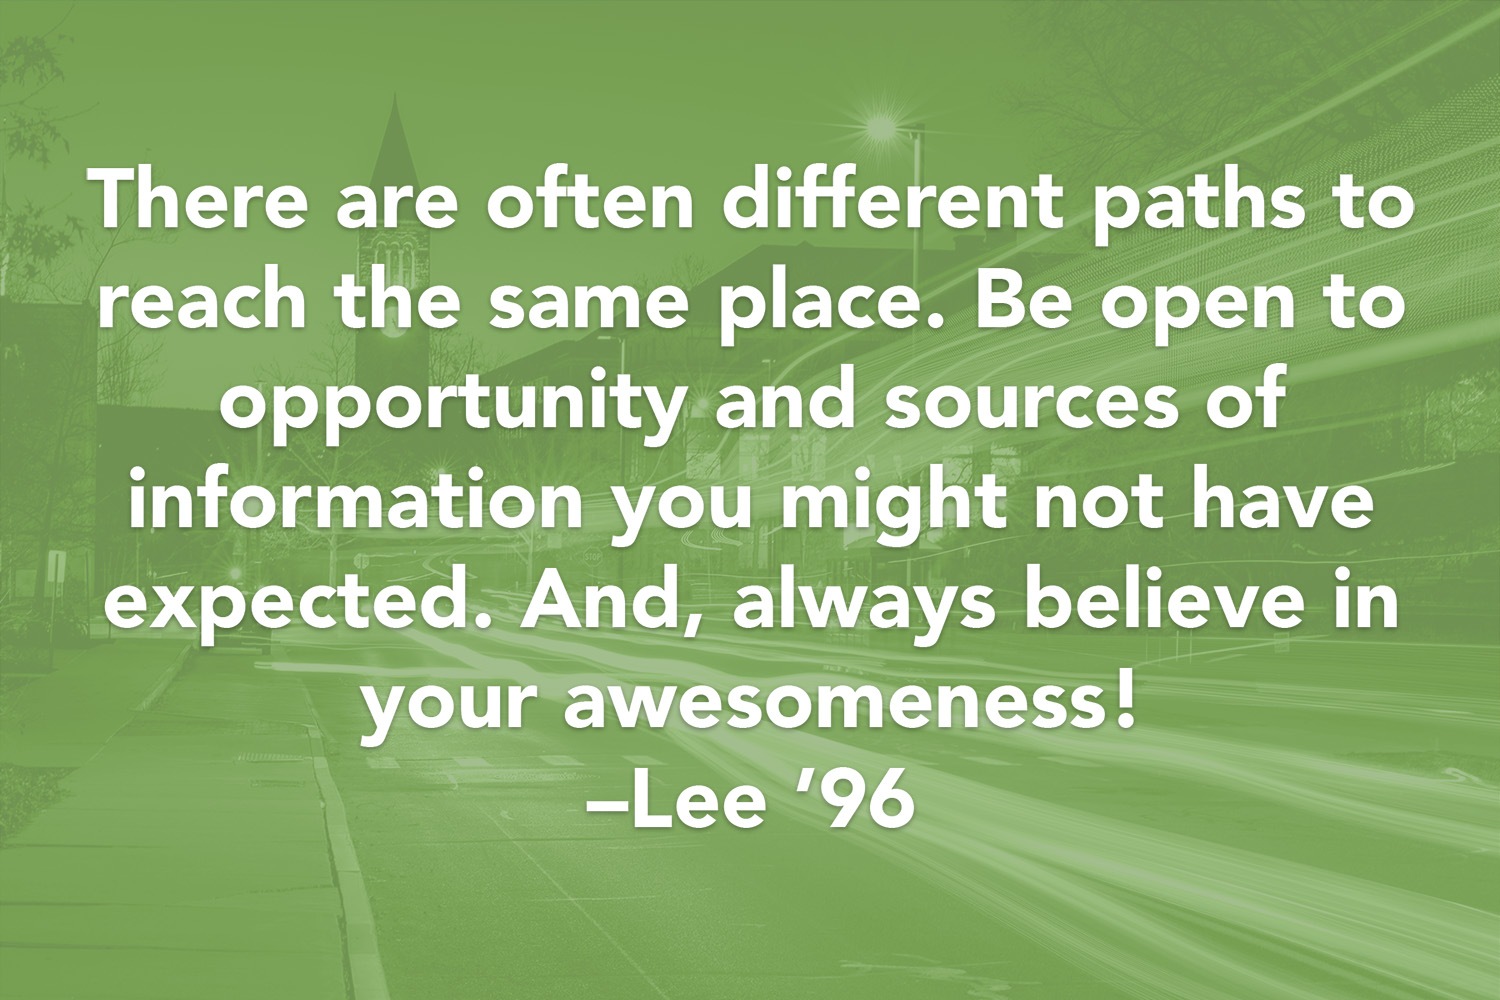 Quote: There are often different paths to reach the same place. Be open to opportunity and sources of information you might not have expected. And, always believe in your awesomeness! -Lee '96